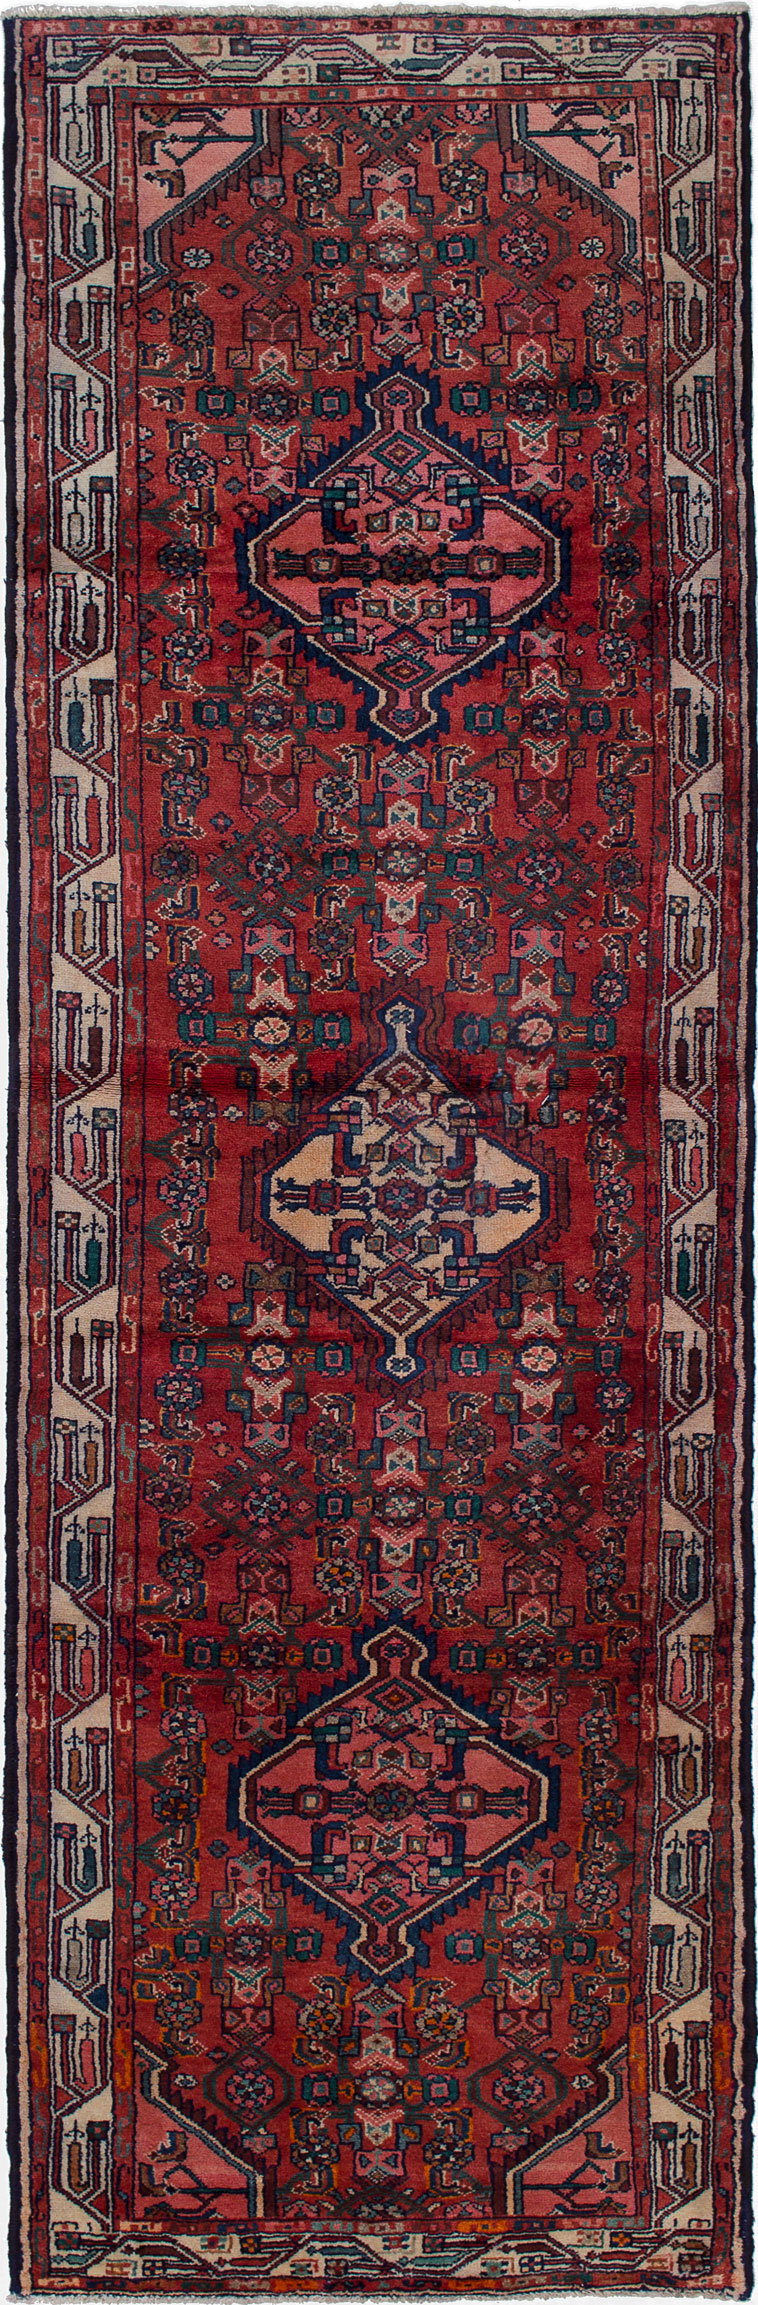 Hand-knotted Hamadan Red Wool Rug 3'3" x 10'2"  Size: 3'3" x 10'2"  